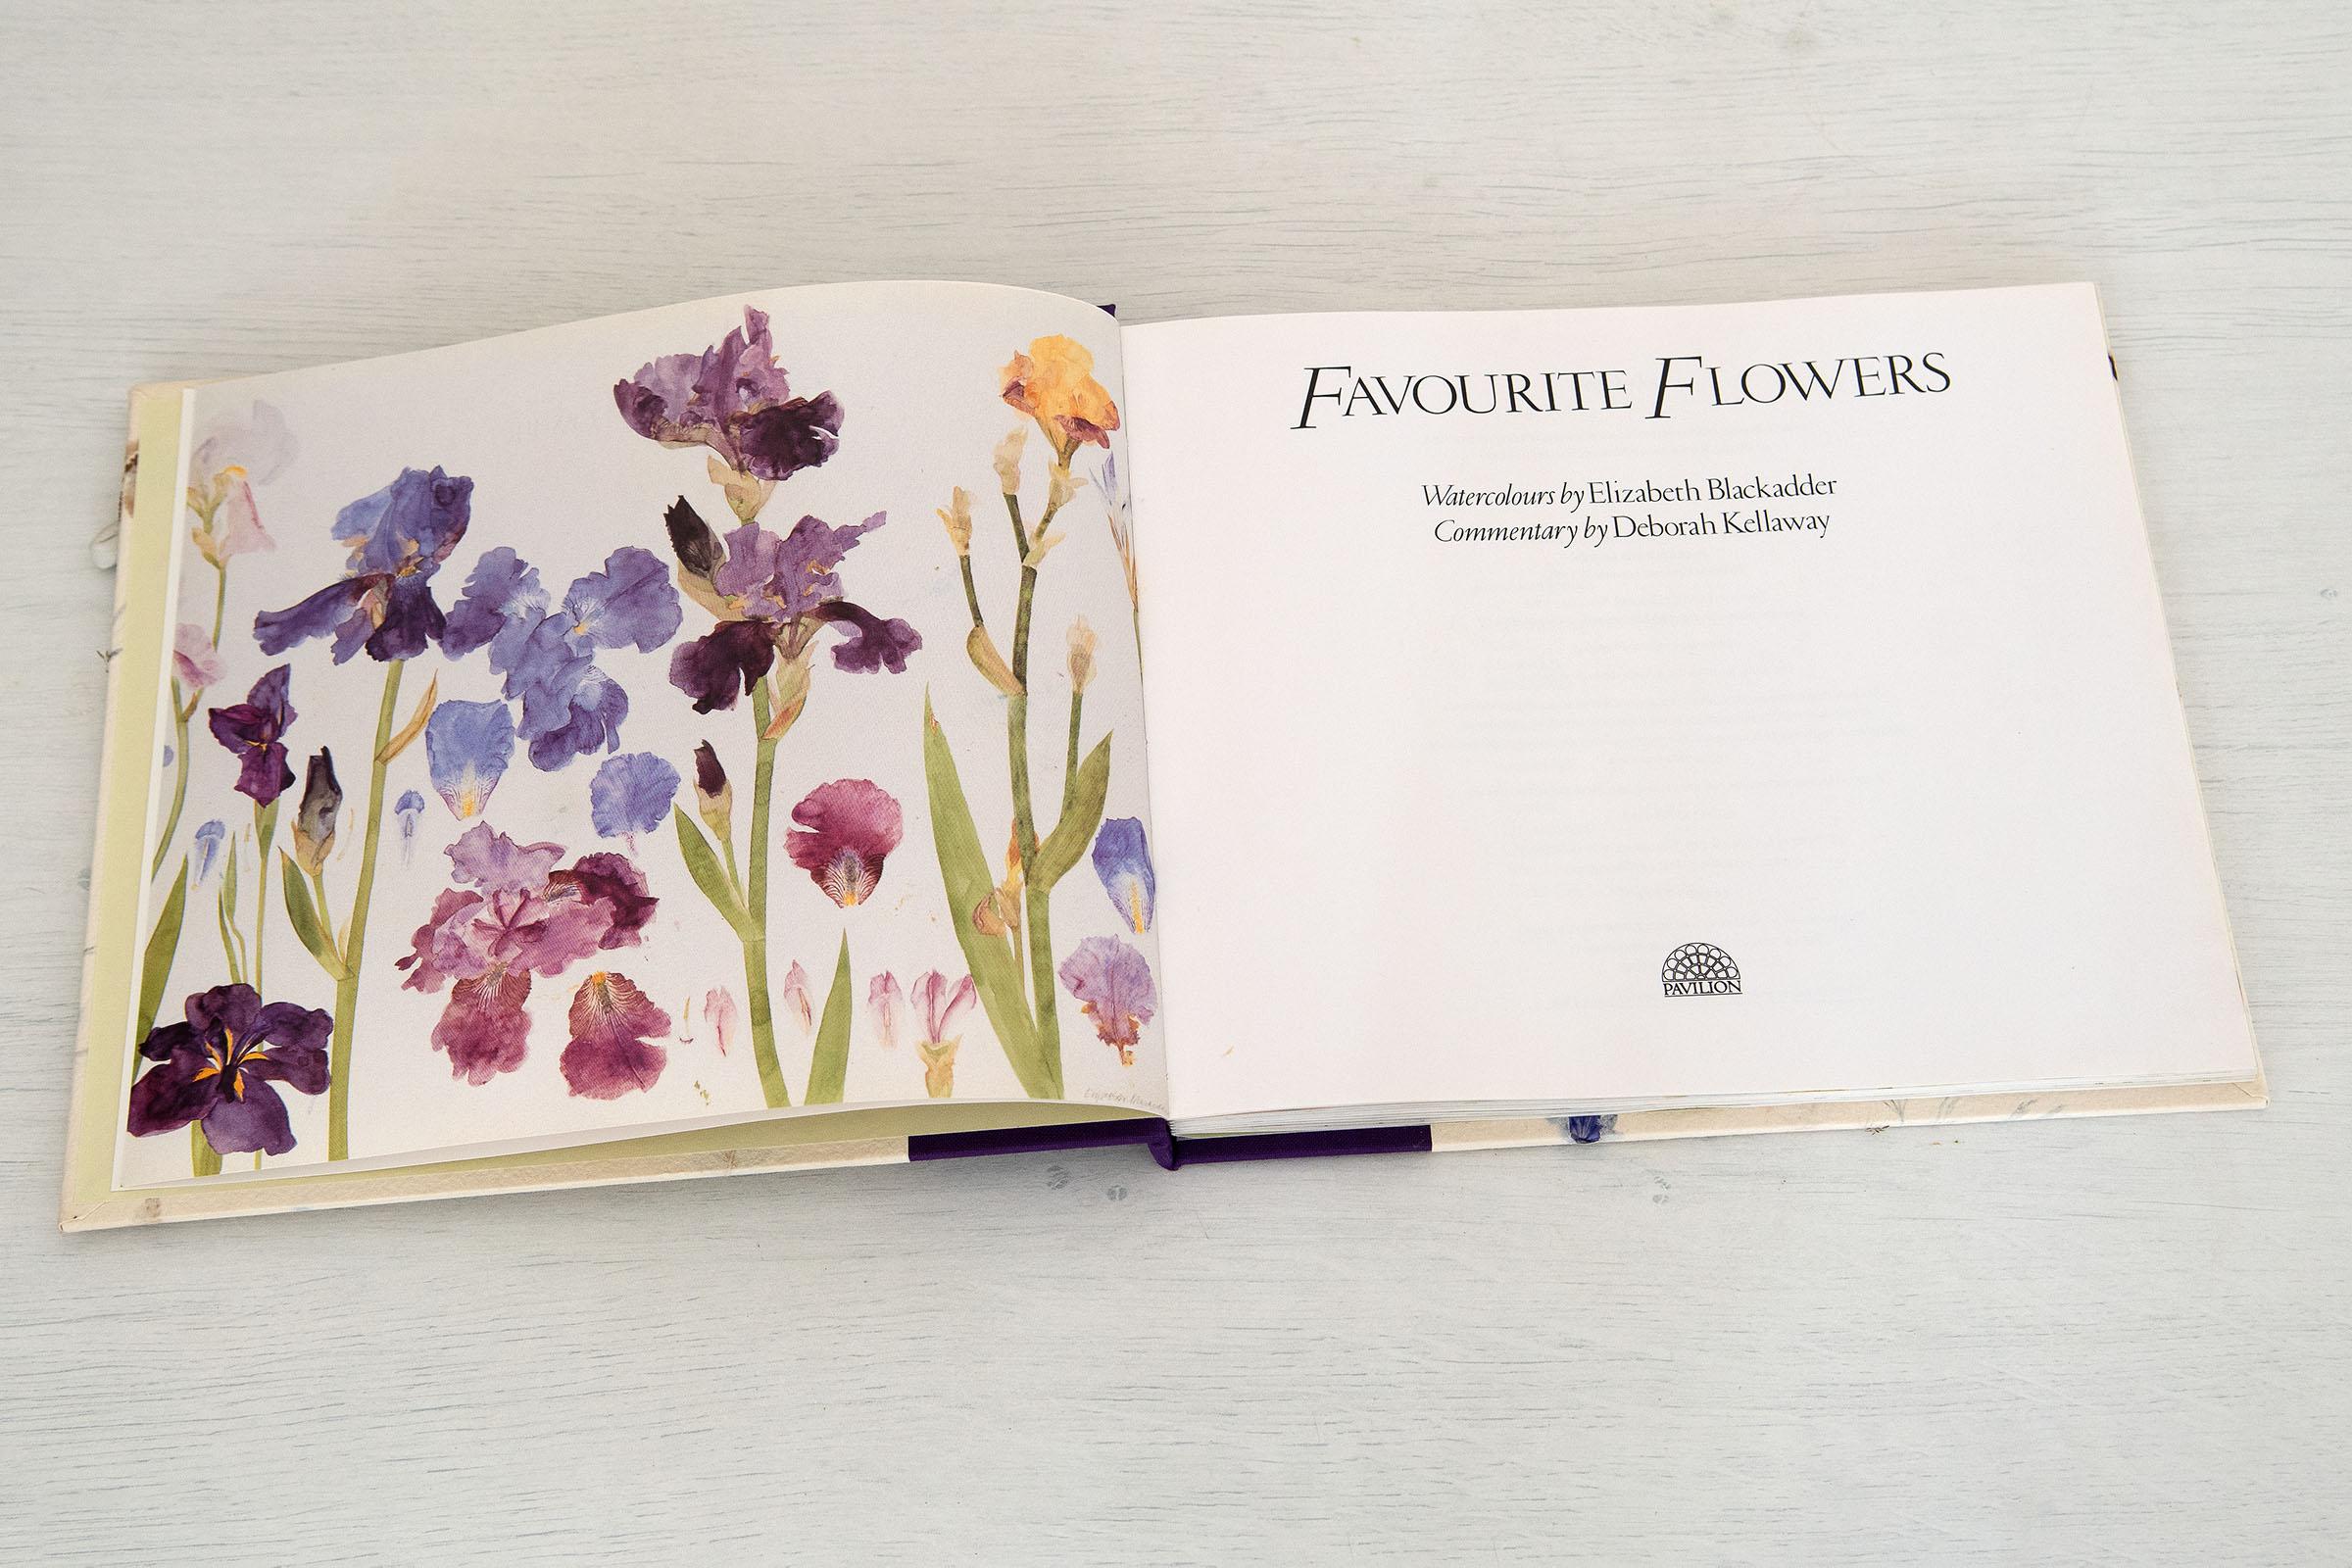 'Favourite Flowers' Limited edition book with signed aquatint 'Salpiglossis' - Contemporary Print by Elizabeth Blackadder